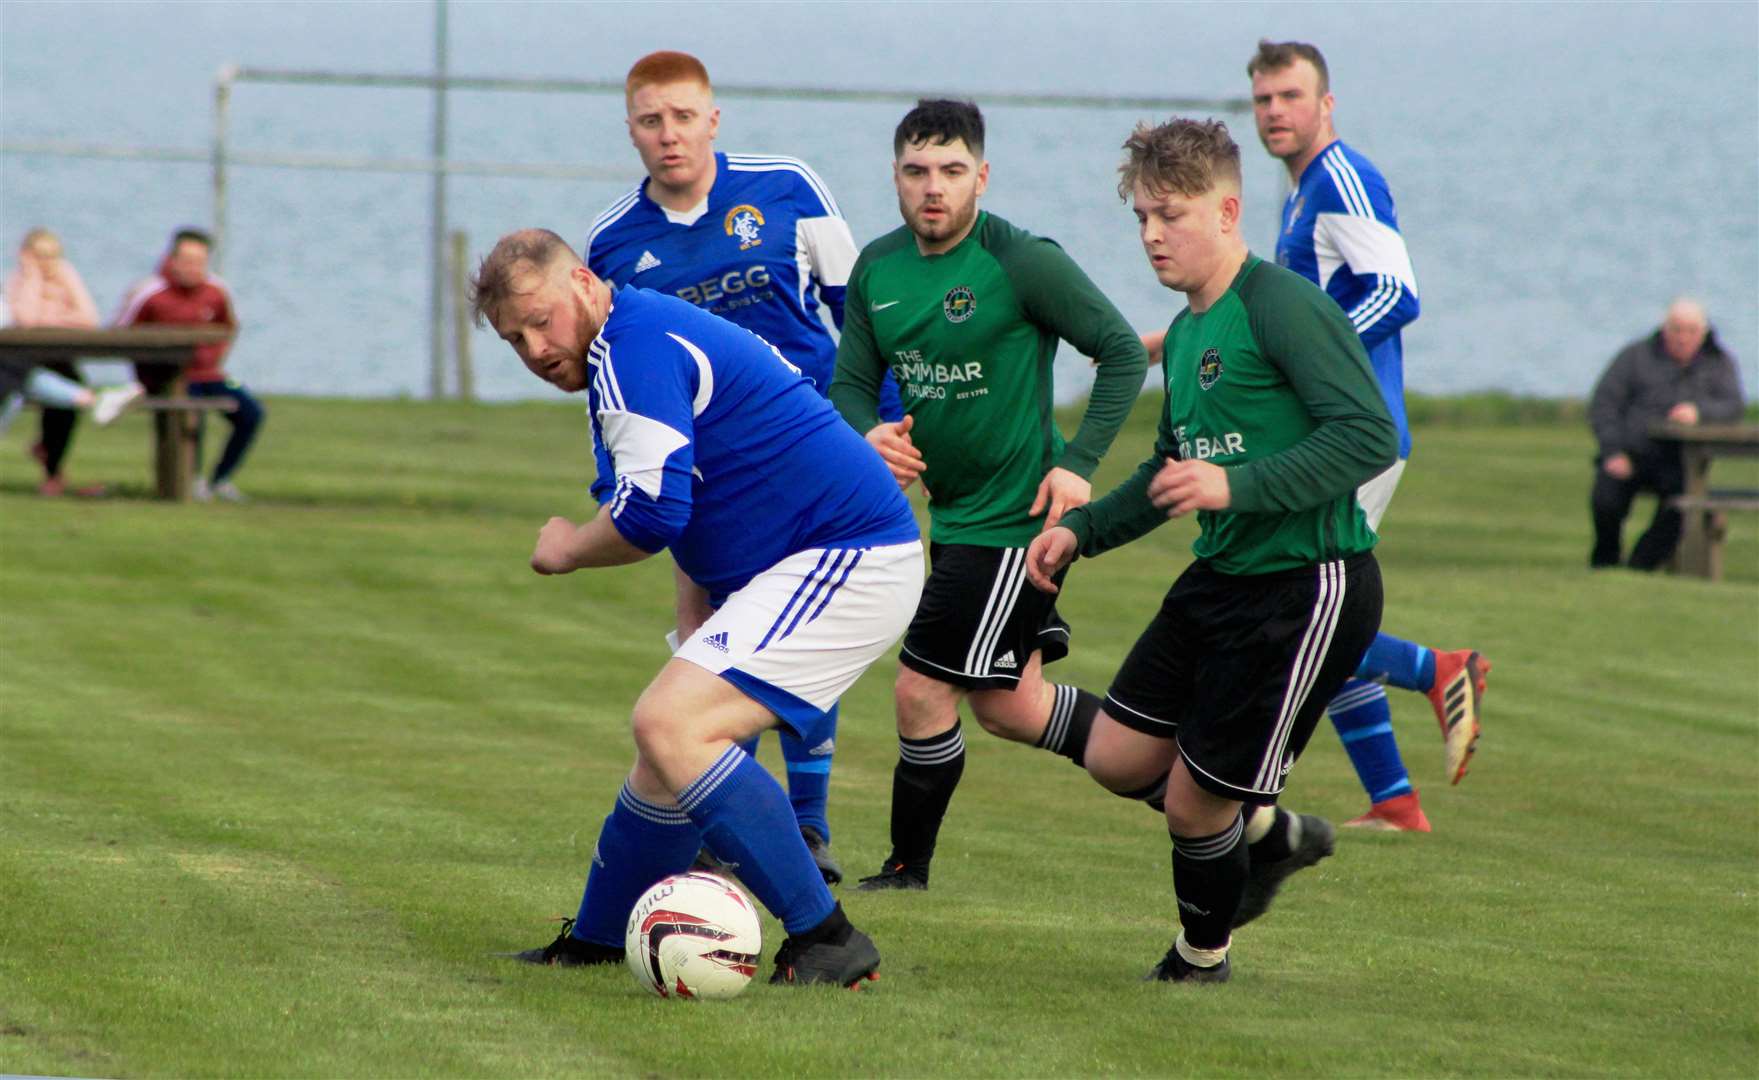 Keiss and Thurso Pentland both had away wins on Wednesday night in Caithness AFA Division Two.